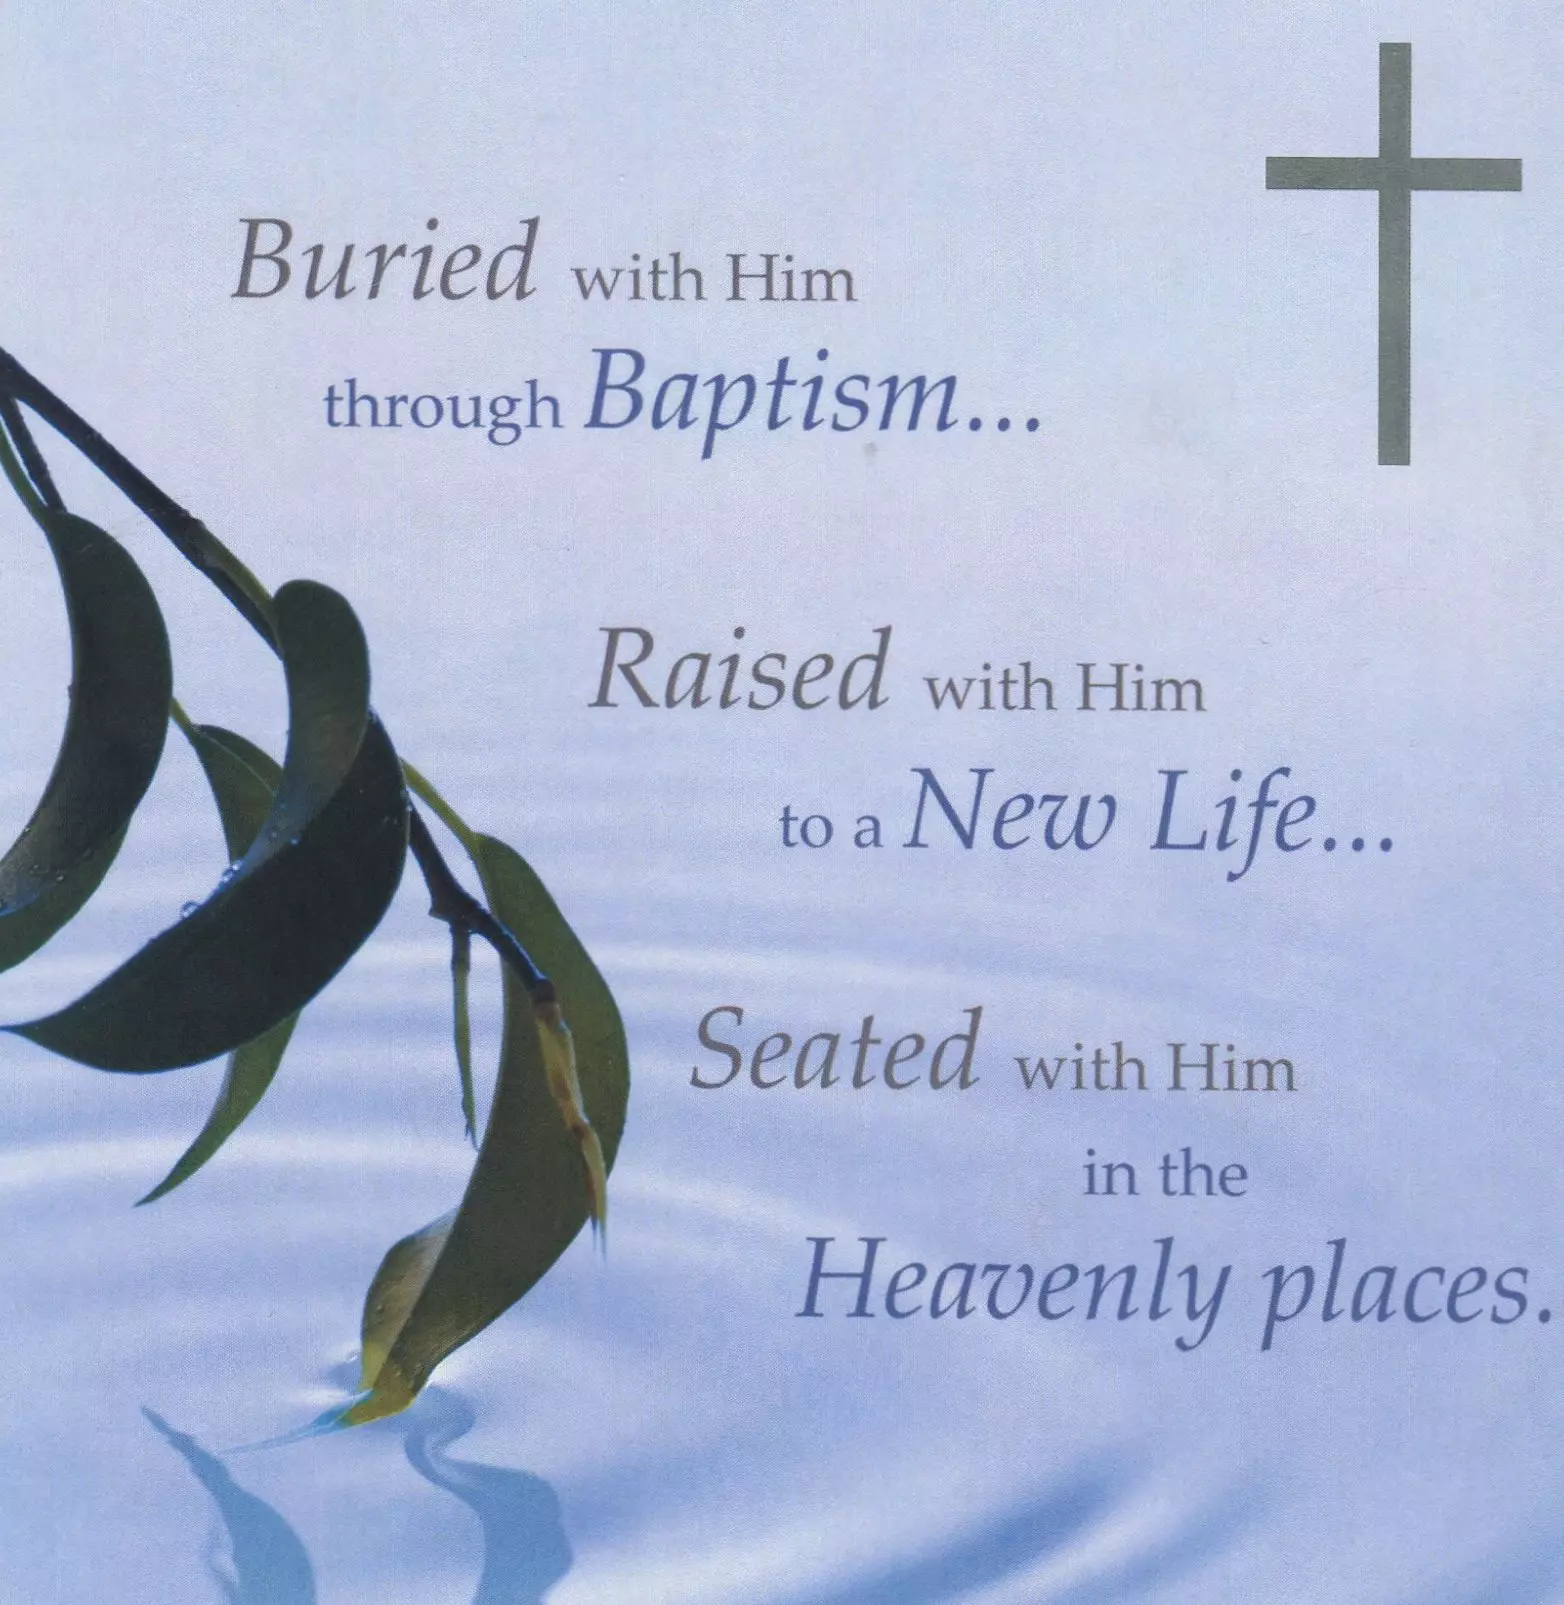 Buried with Him Through Baptism - Single Card